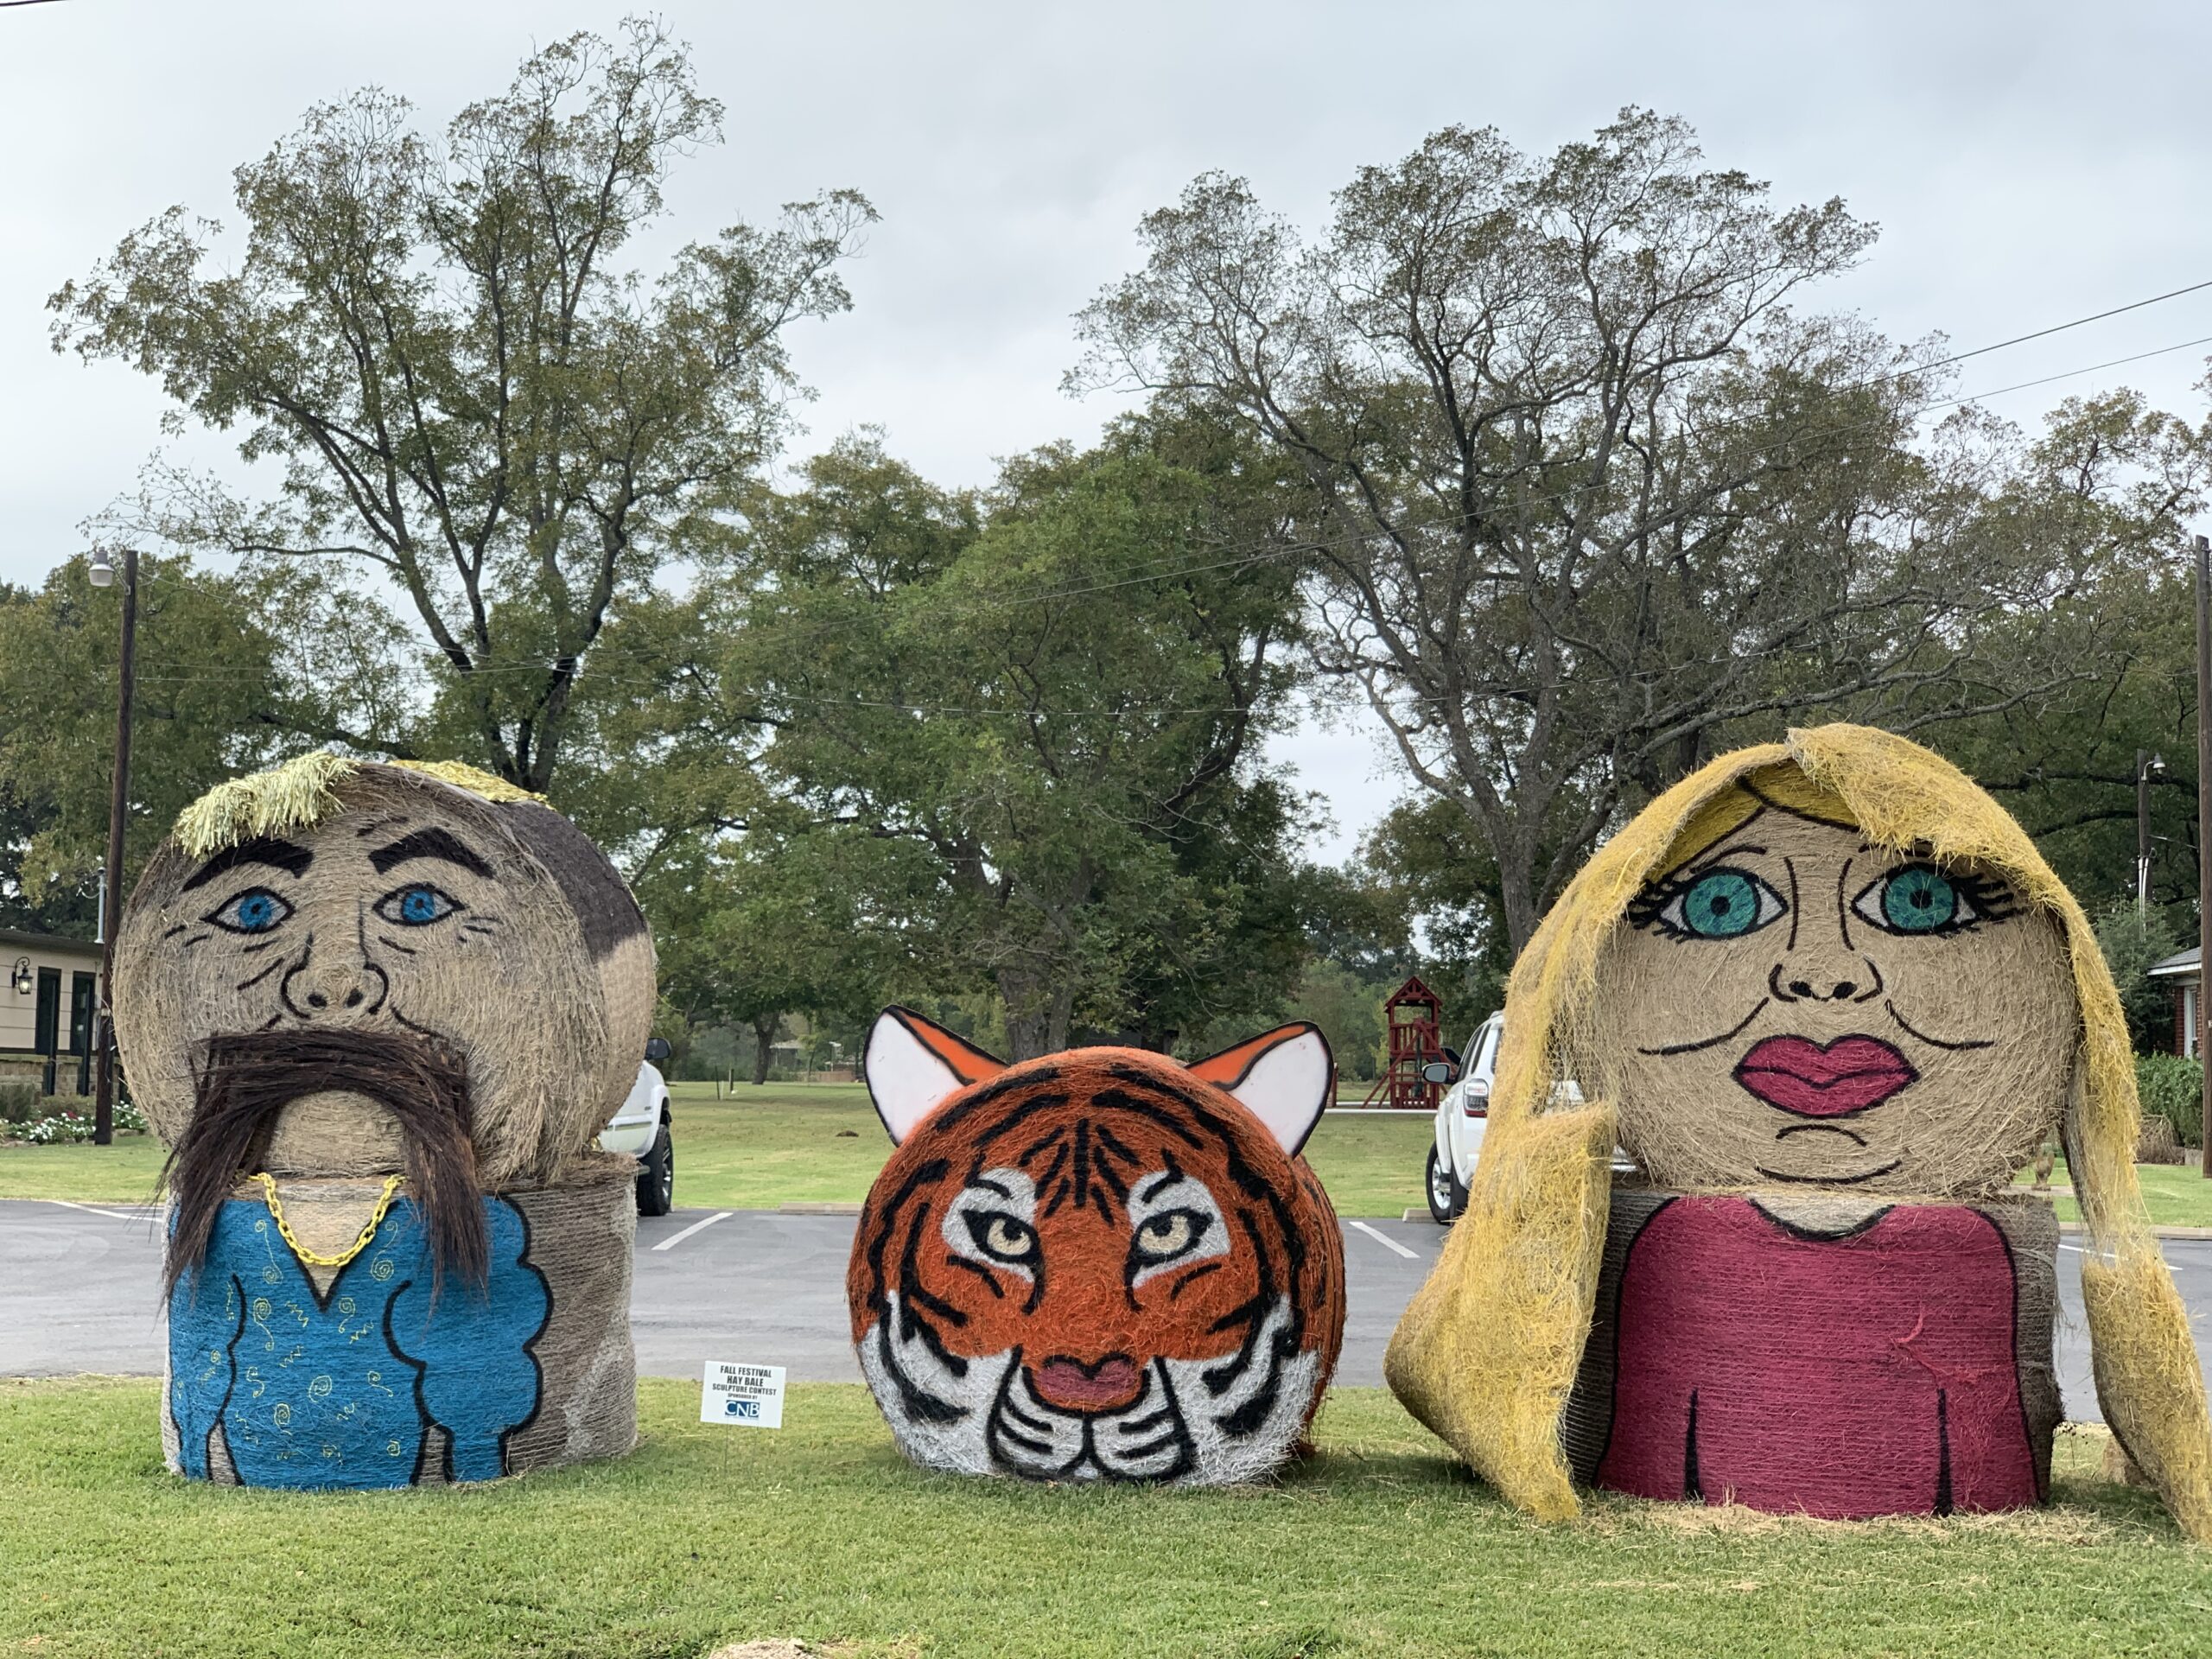 List of Entries in the 2020 Hopkins County Fall Festival Hay Bale Sculpture Contest Sponsored by City National Bank